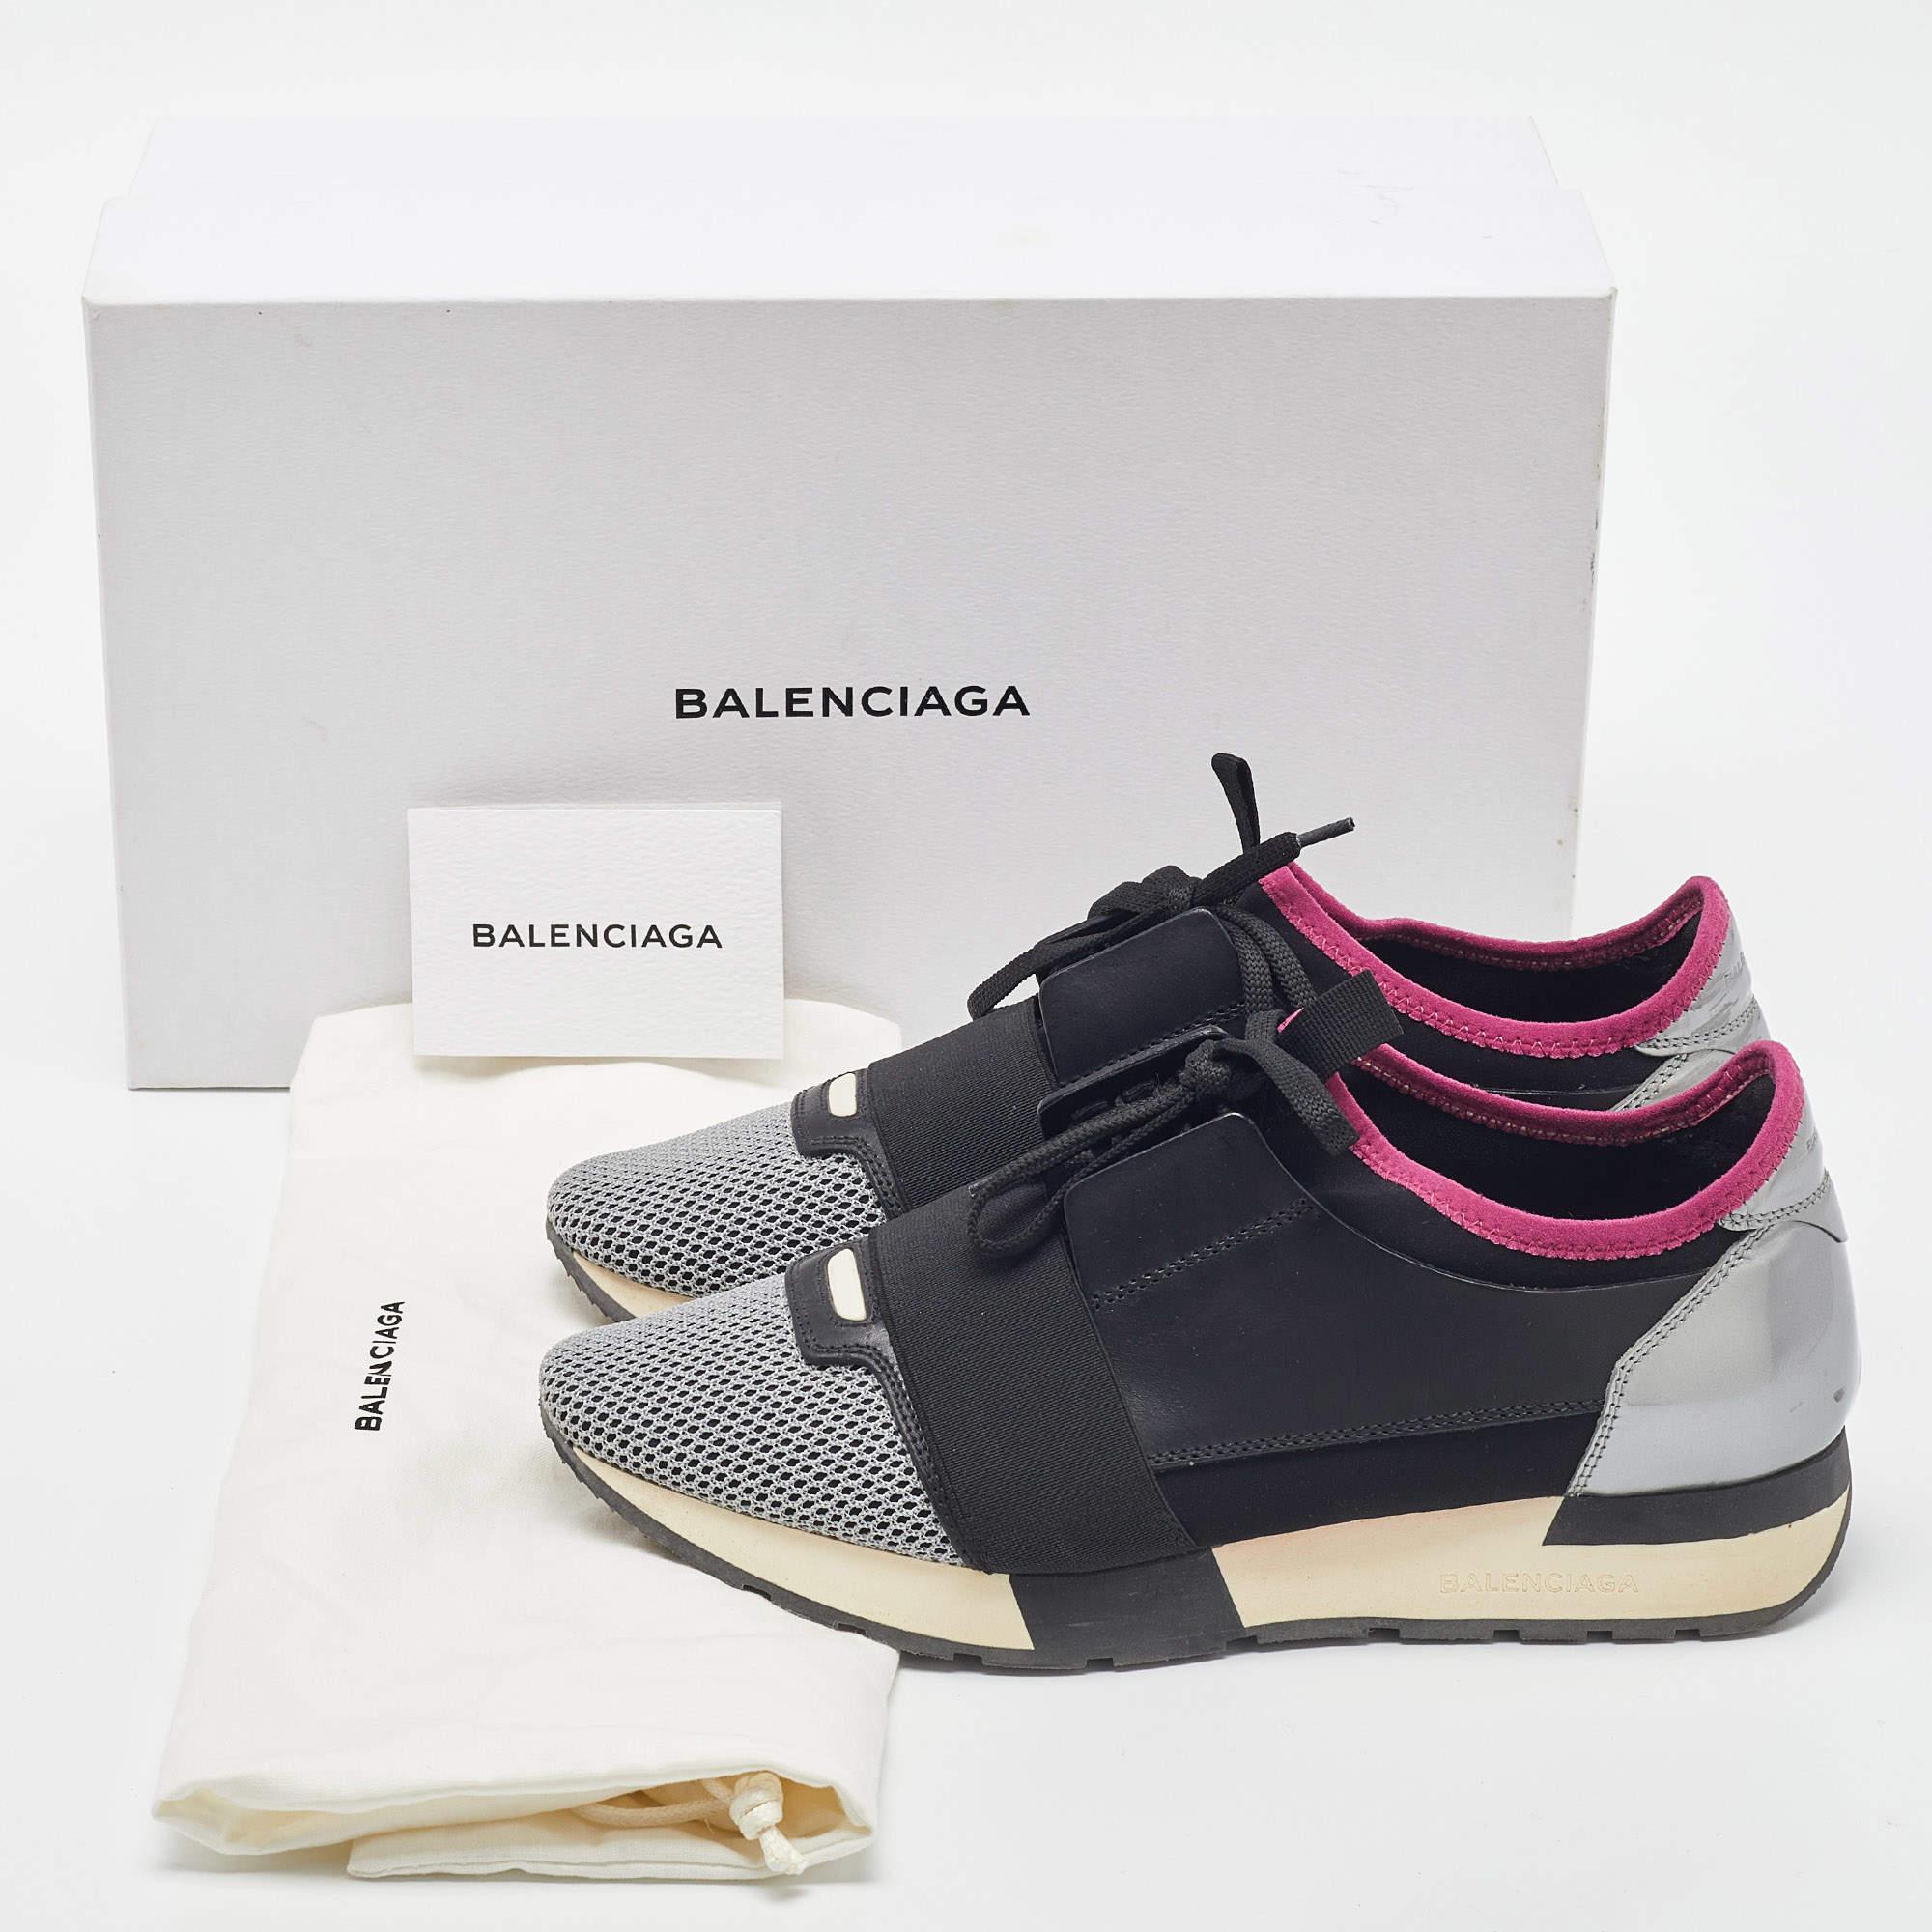 Balenciaga Tricolor Mesh and Leather Race Runner Sneakers Size 40 3